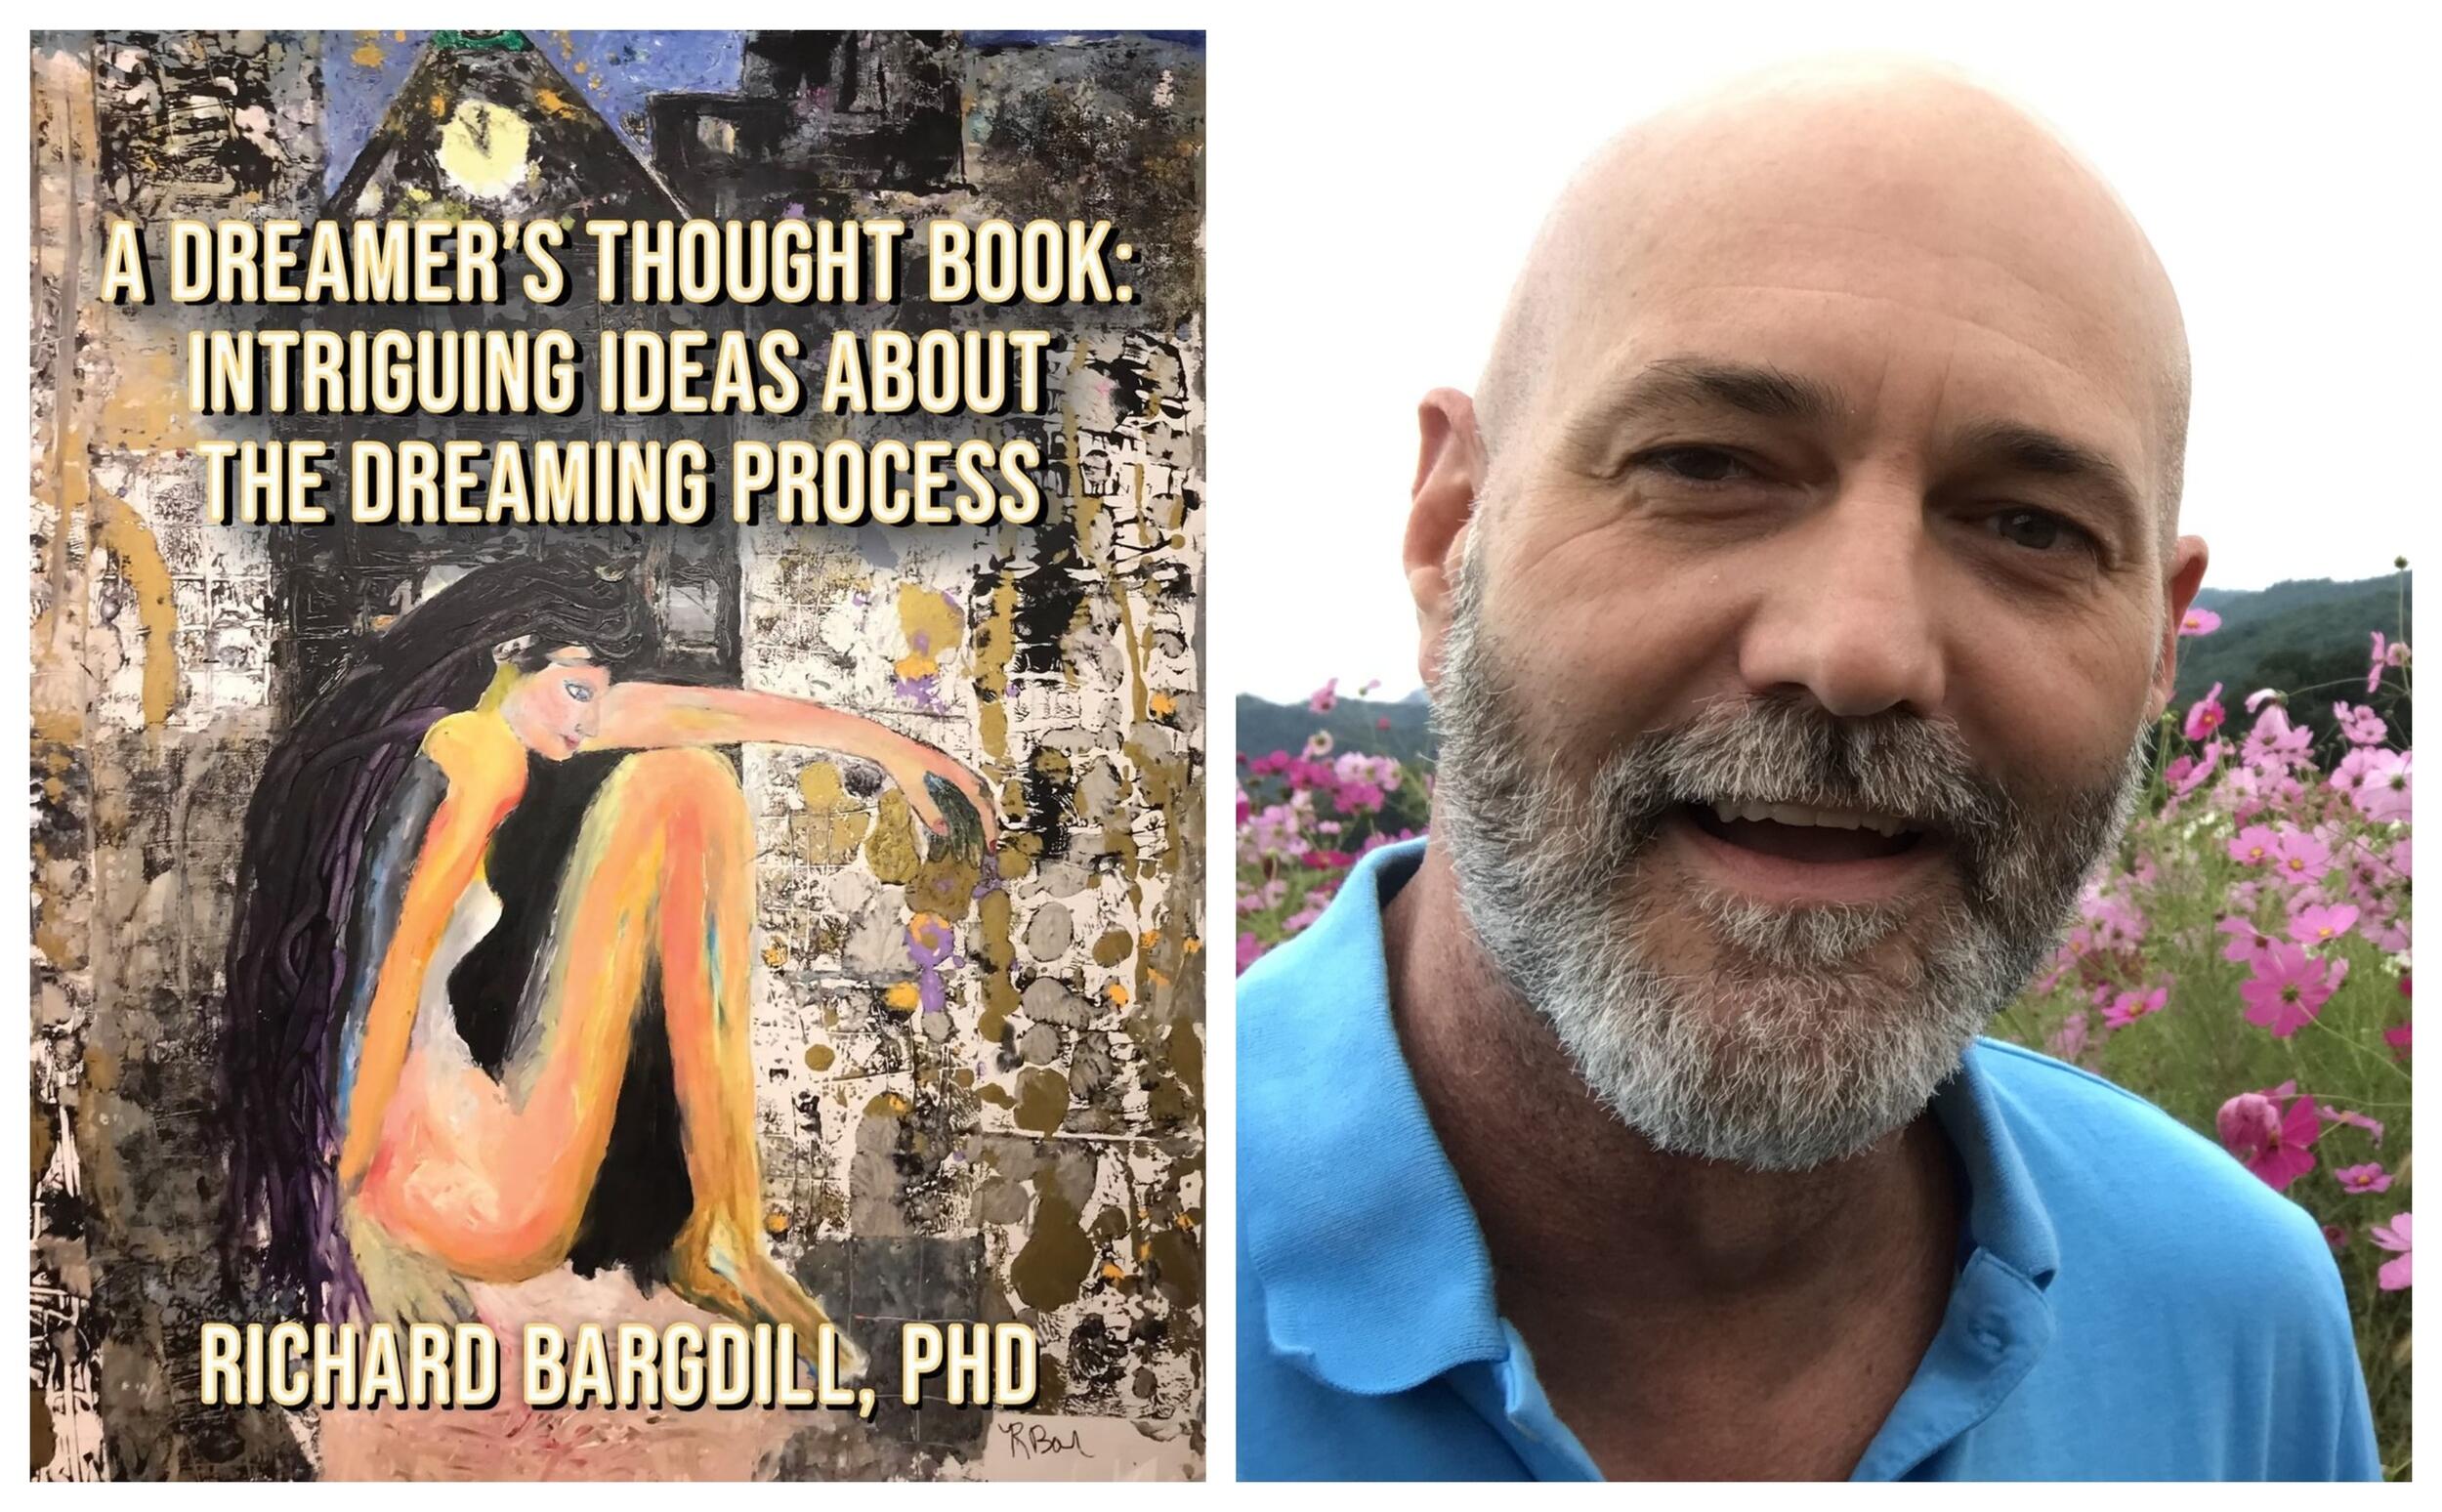 A book cover next to a photo of a man from the neck up. The book cover says \"A DREAMER'S THOUGHT BOOK: INTRIGUING IDEAS ABOUT THE DREAM PROCESS RICHARD BARDILL, PHD\"